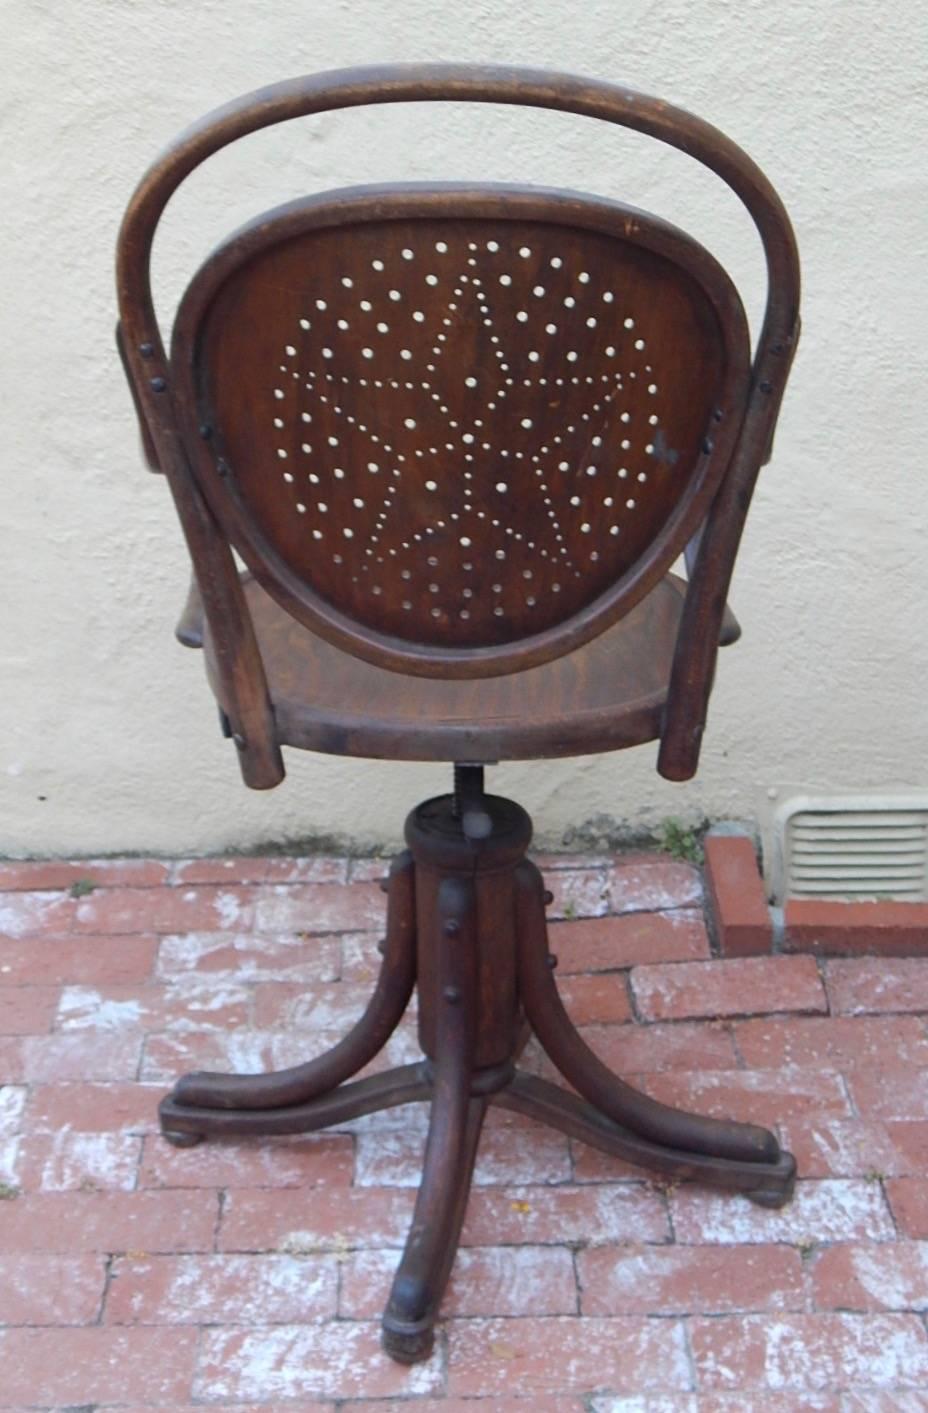 Arts & Crafts era swivel chair crafted in oak. With hole punch detail at seat back. Height adjusts as you turn. In excellent original vintage condition, with some cracking-see detailed photos. Made by Josef Kohn Company in Vienna, Austria, circa